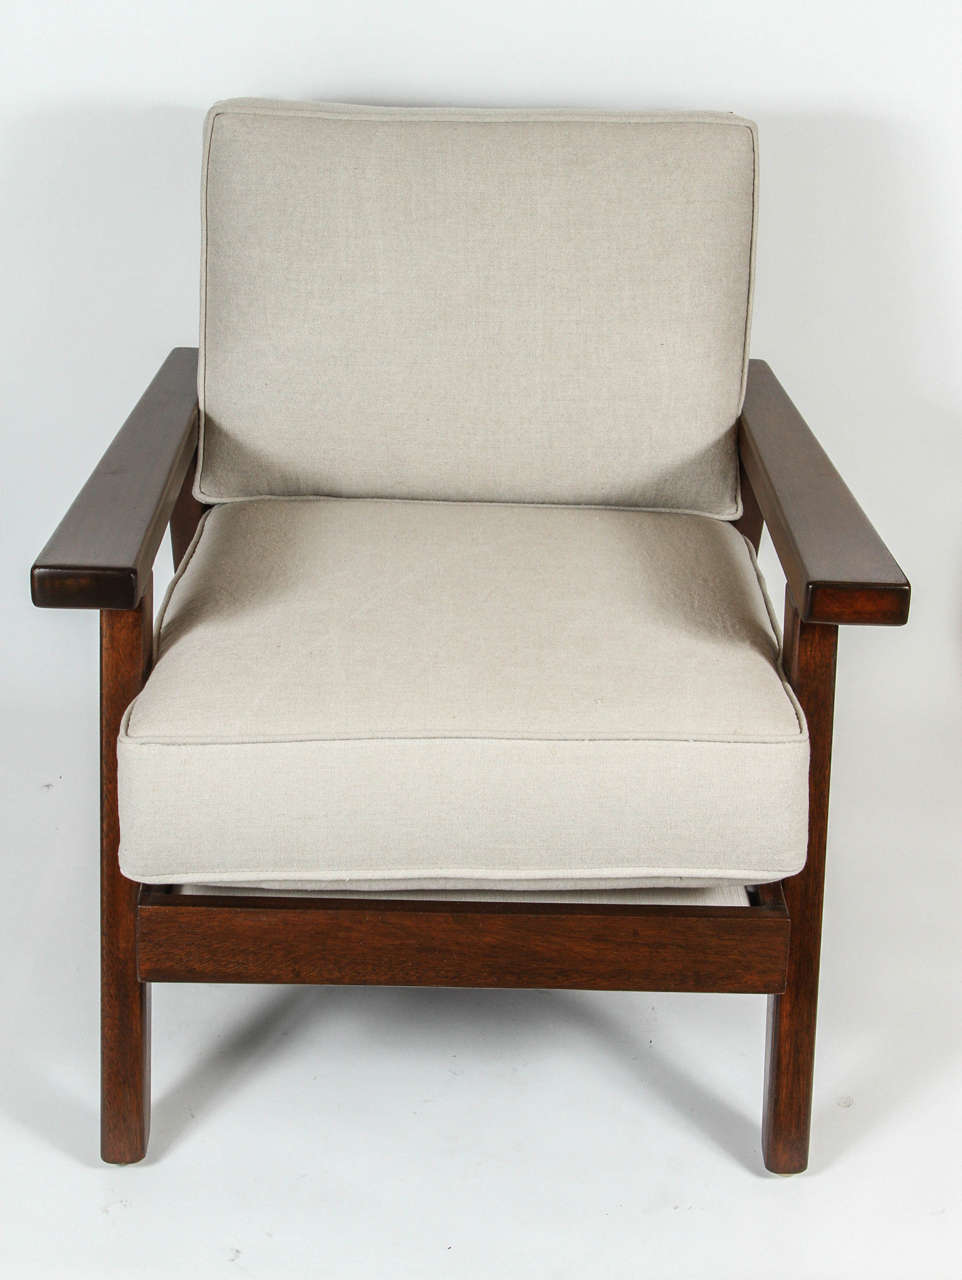 Pair of wood frame club chairs. Newly refinished with new cushions upholstered in flax linen.